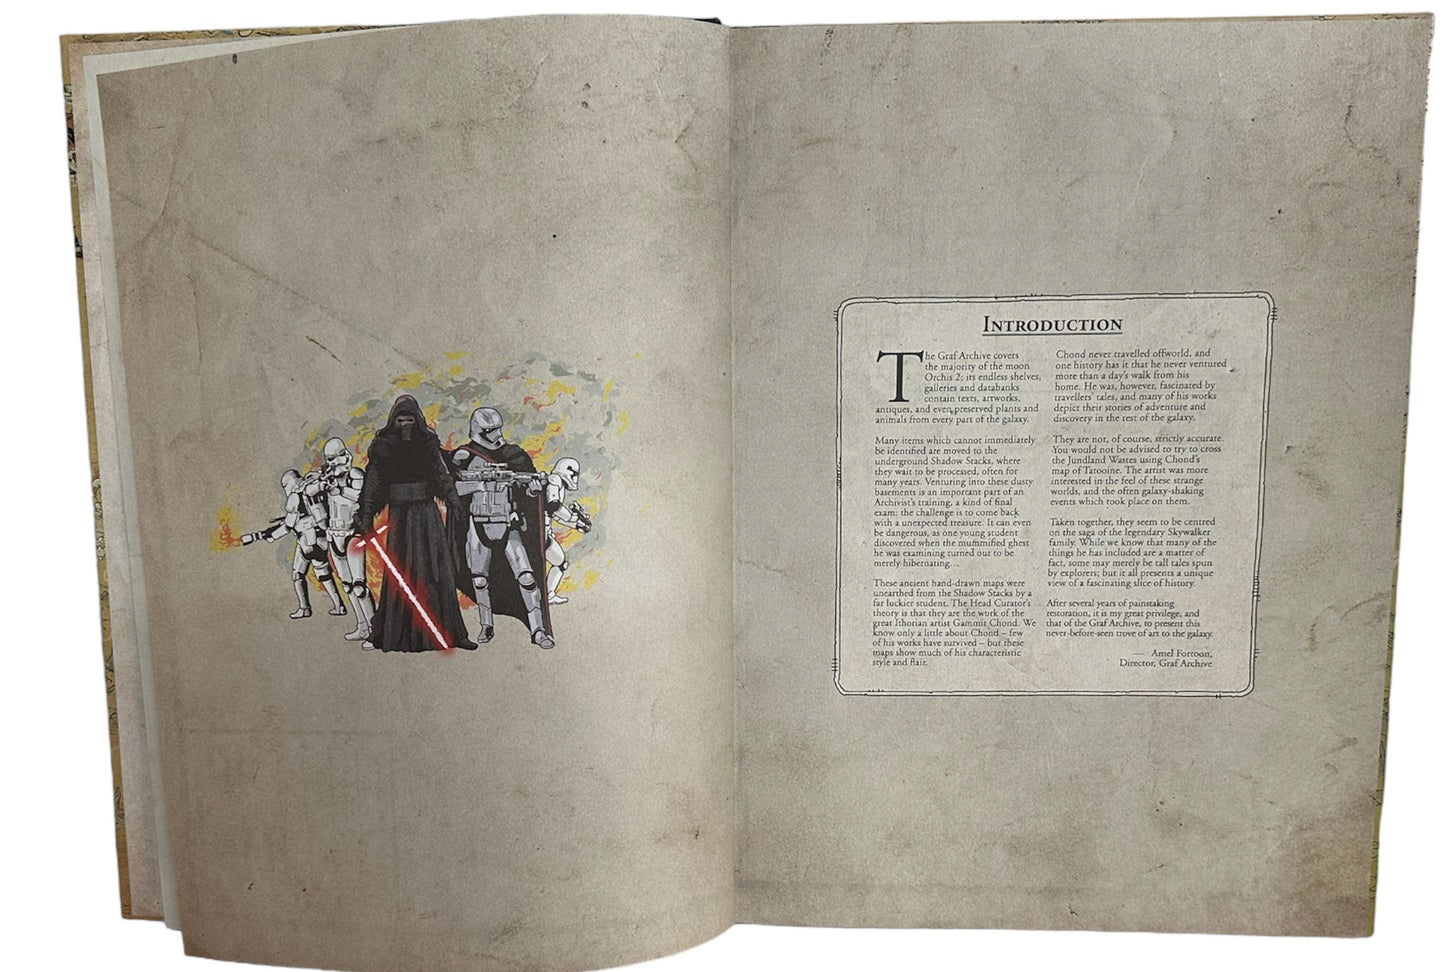 Star Wars The Last Jedi - Incredible Cross Sections - Large Hardback Book - Brand New Shop Stock Room Find (Copy)